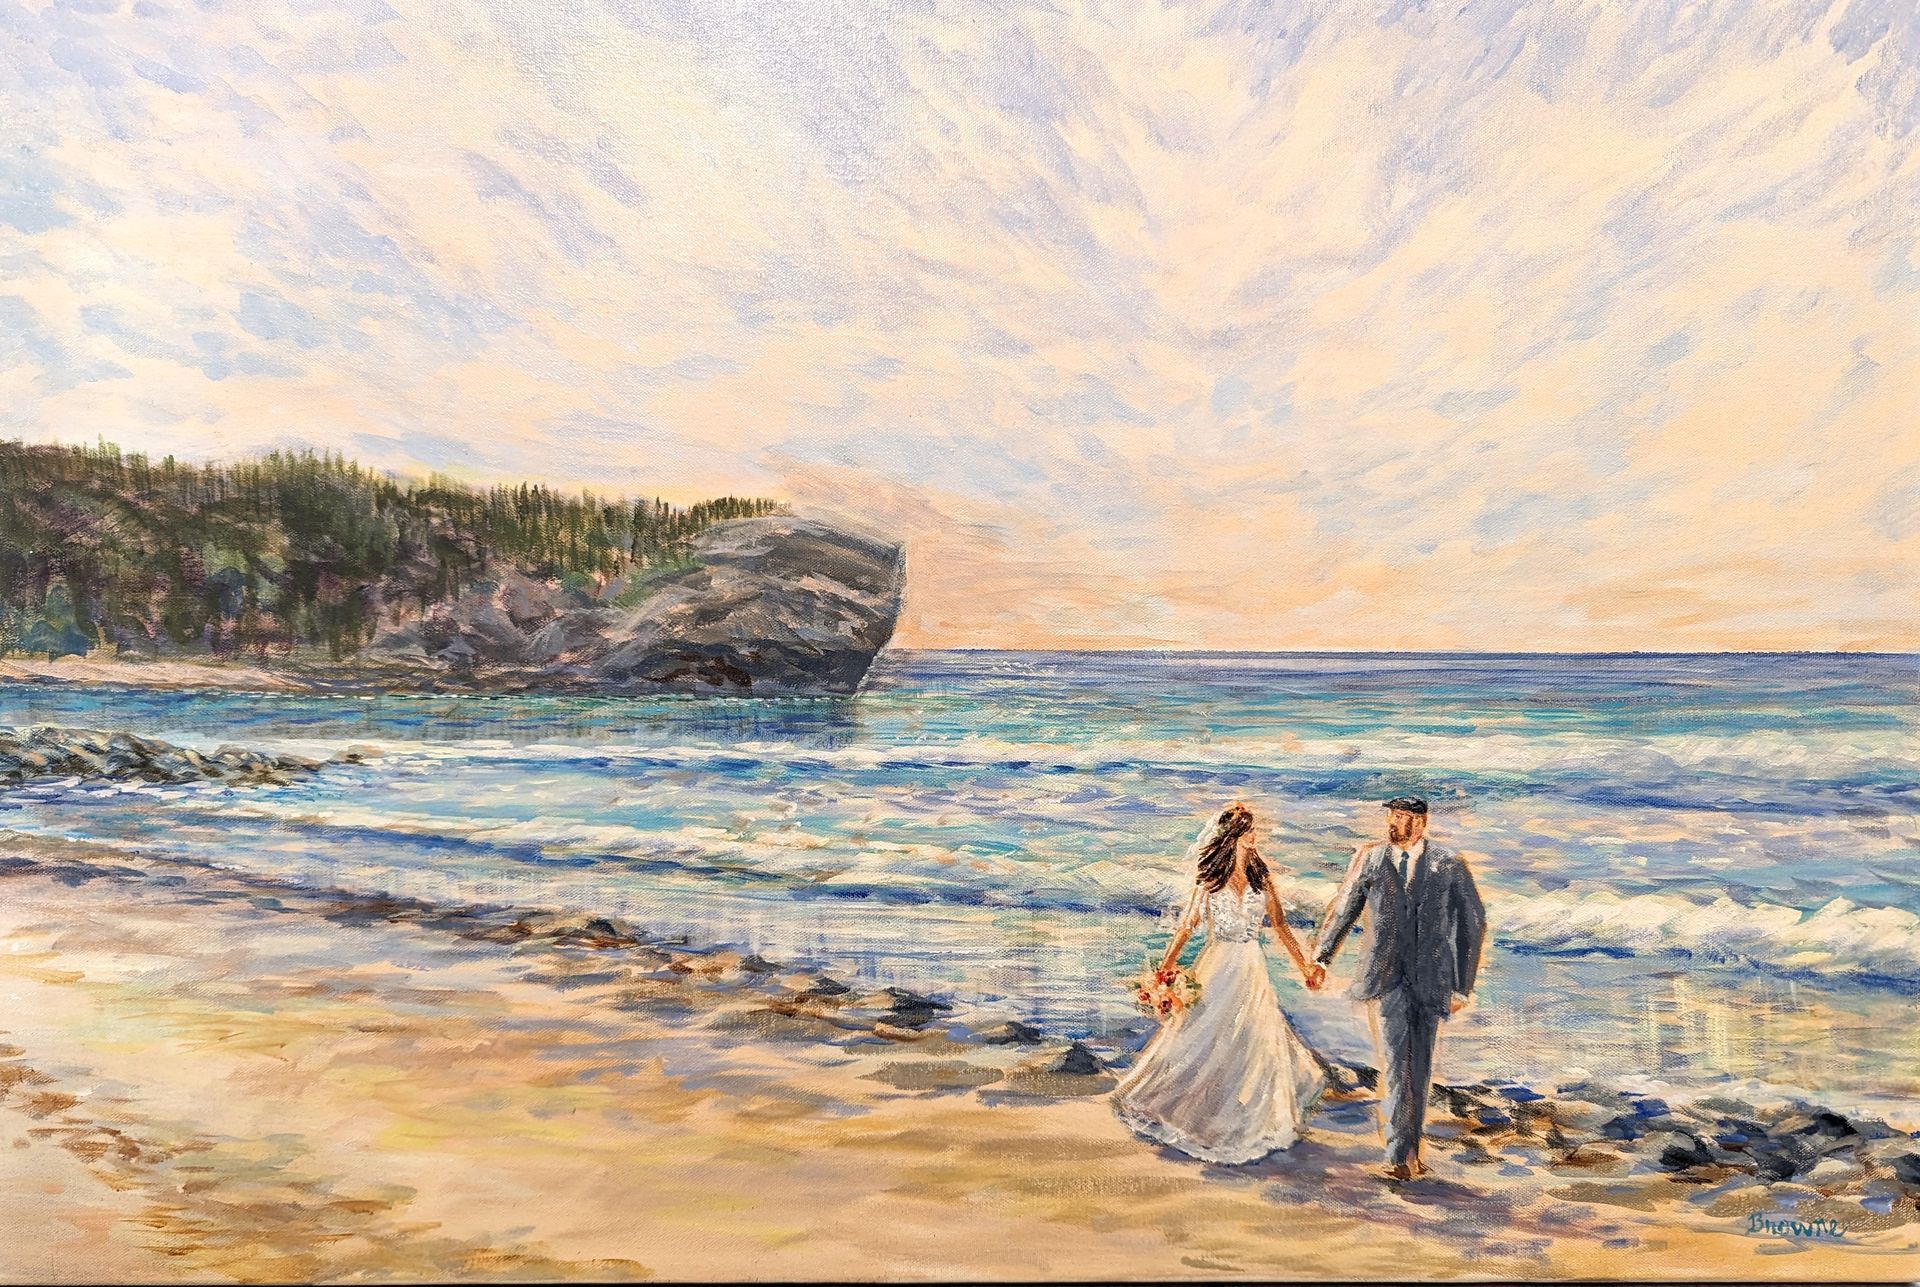 A painting of the bride and groom, holding hands and walking by the seashore.